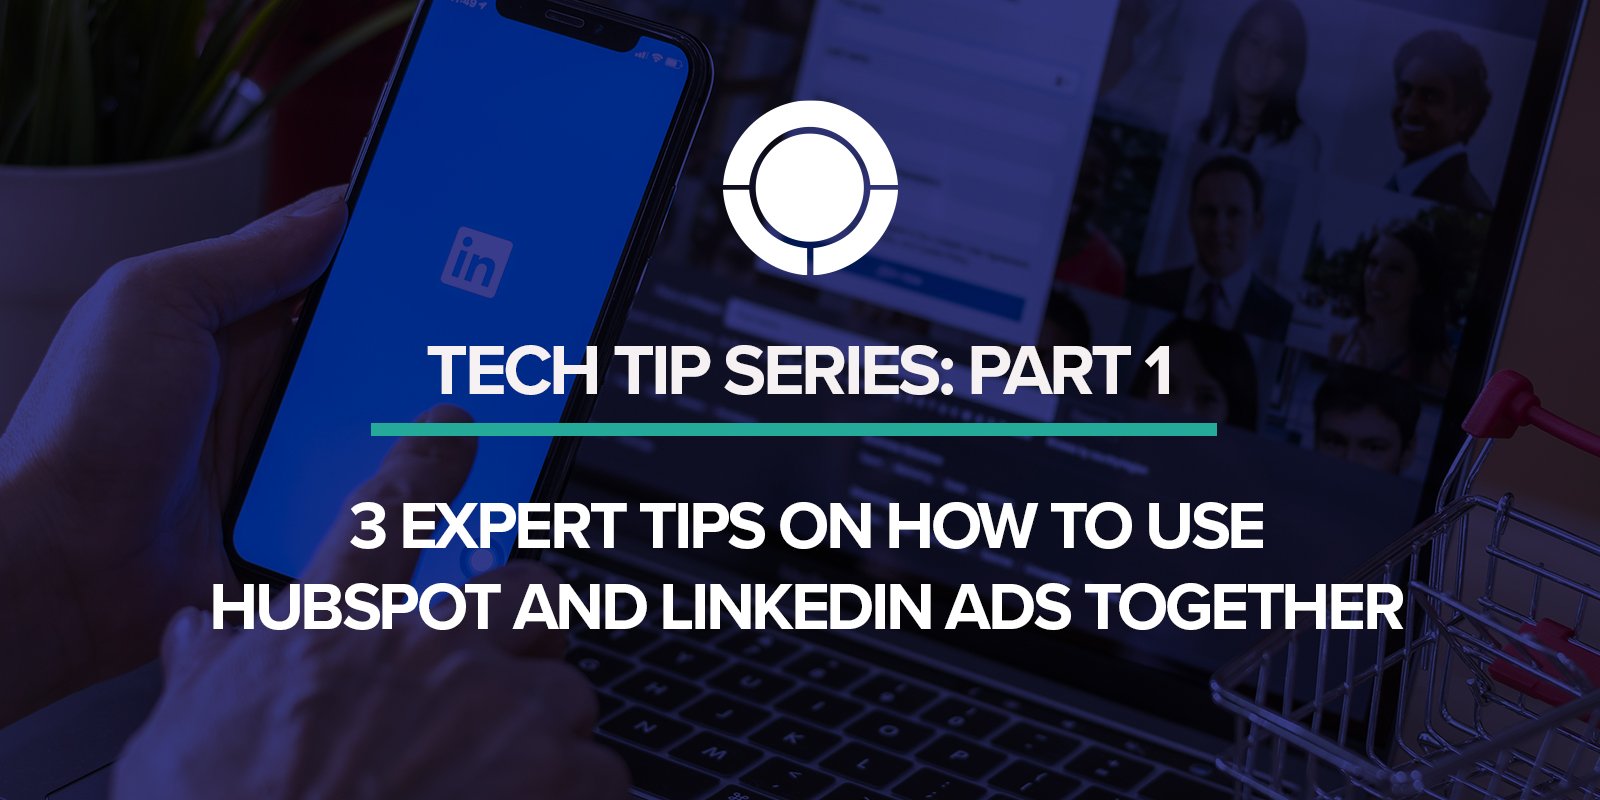 3 Expert Tips in how to use HubSpot and LinkedIn ads together